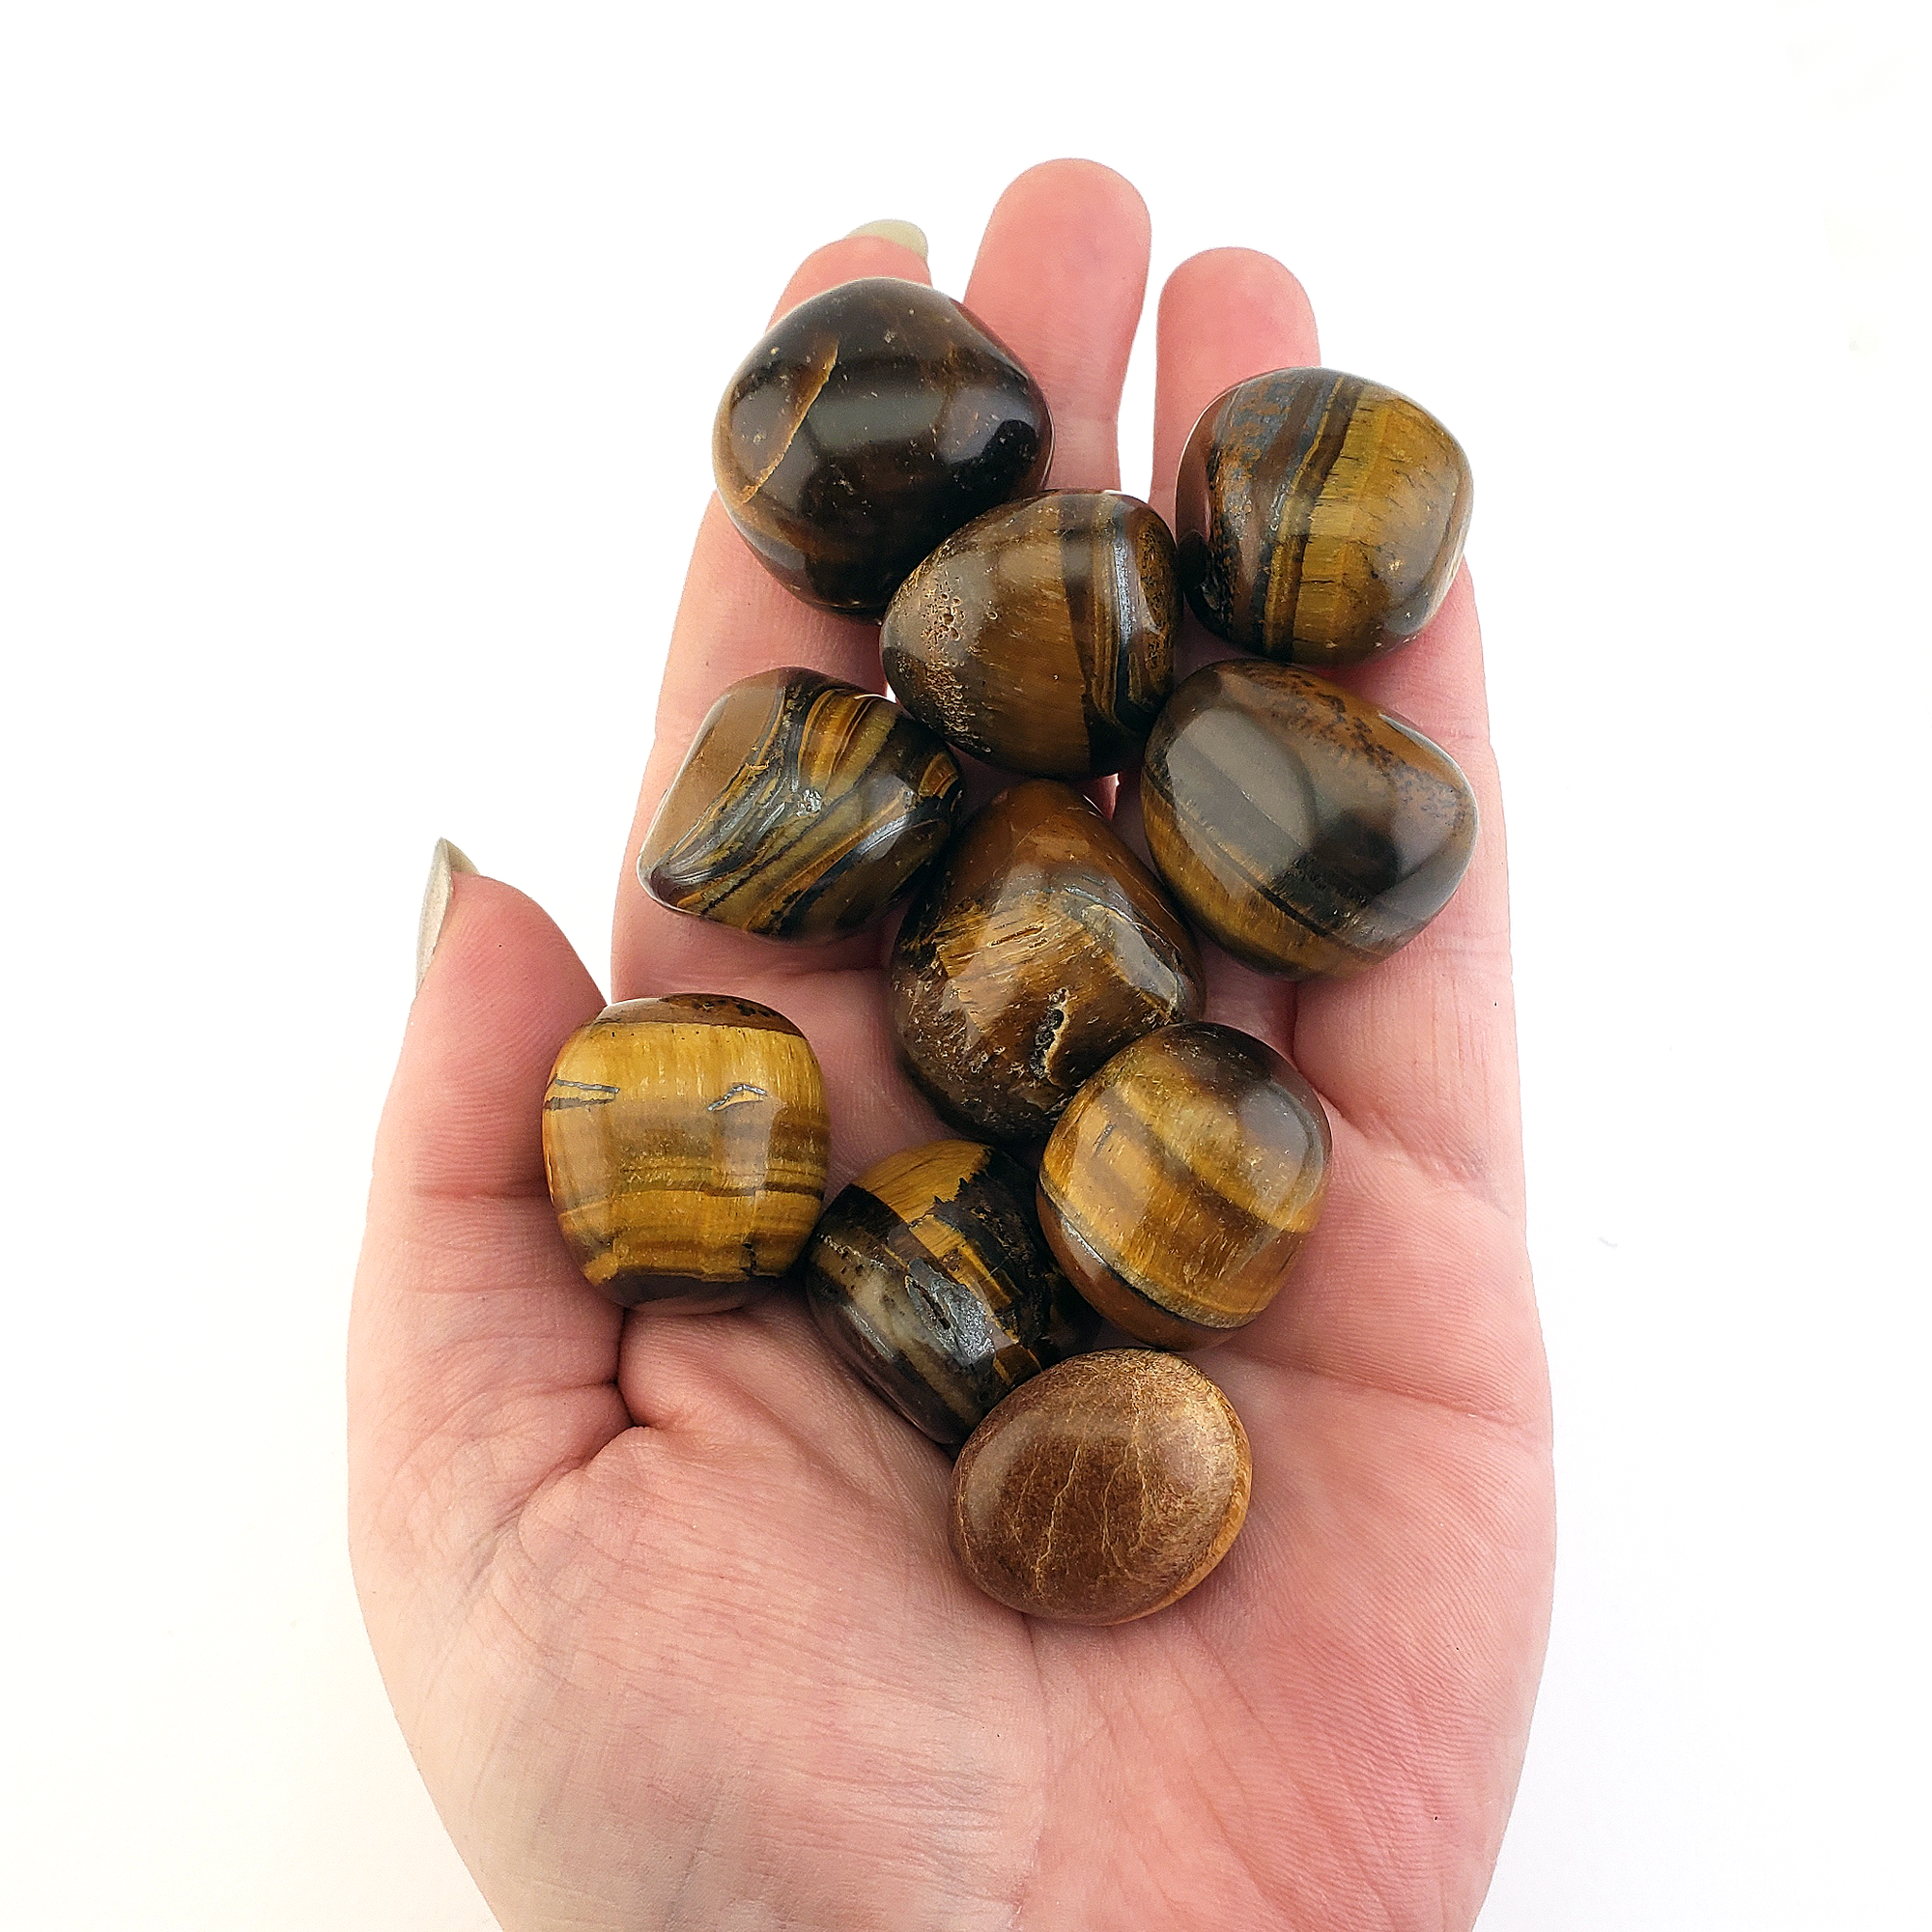 Tigers Eye Natural Tumbled Crystal - One Stone - In Hand over White Background